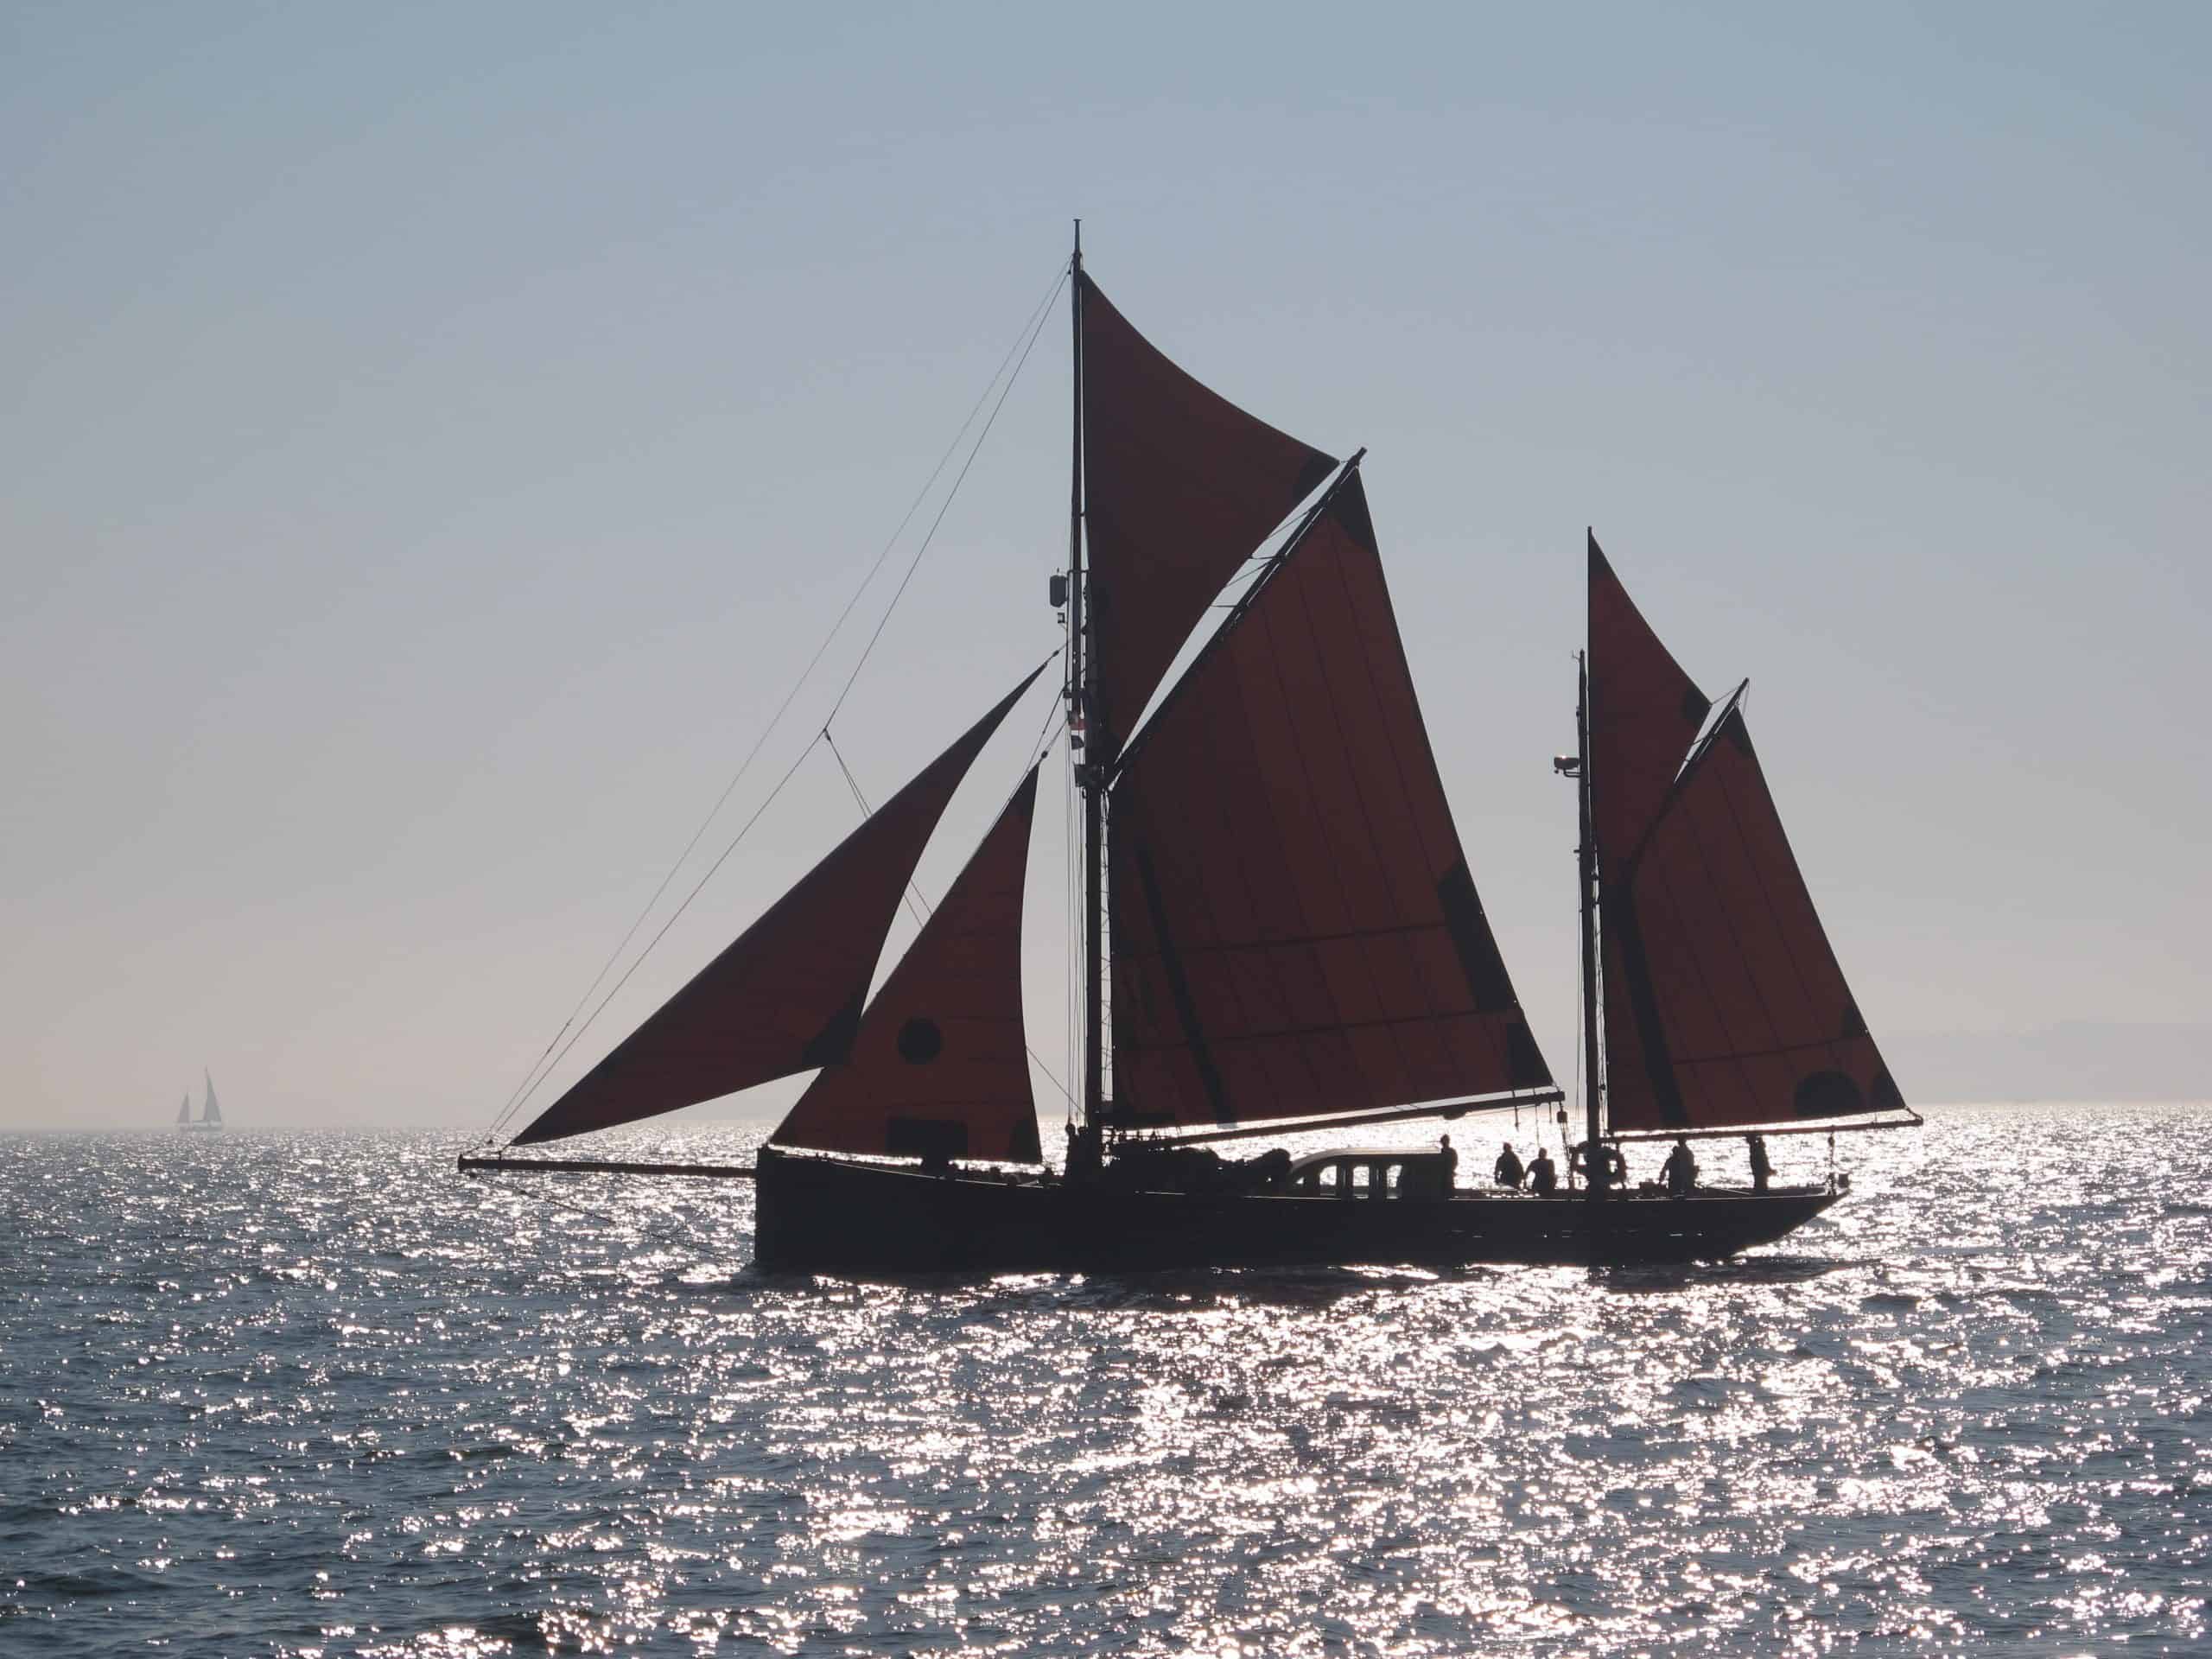 Provident under sail - Sailing Holidays on Provident with Classic Sailing